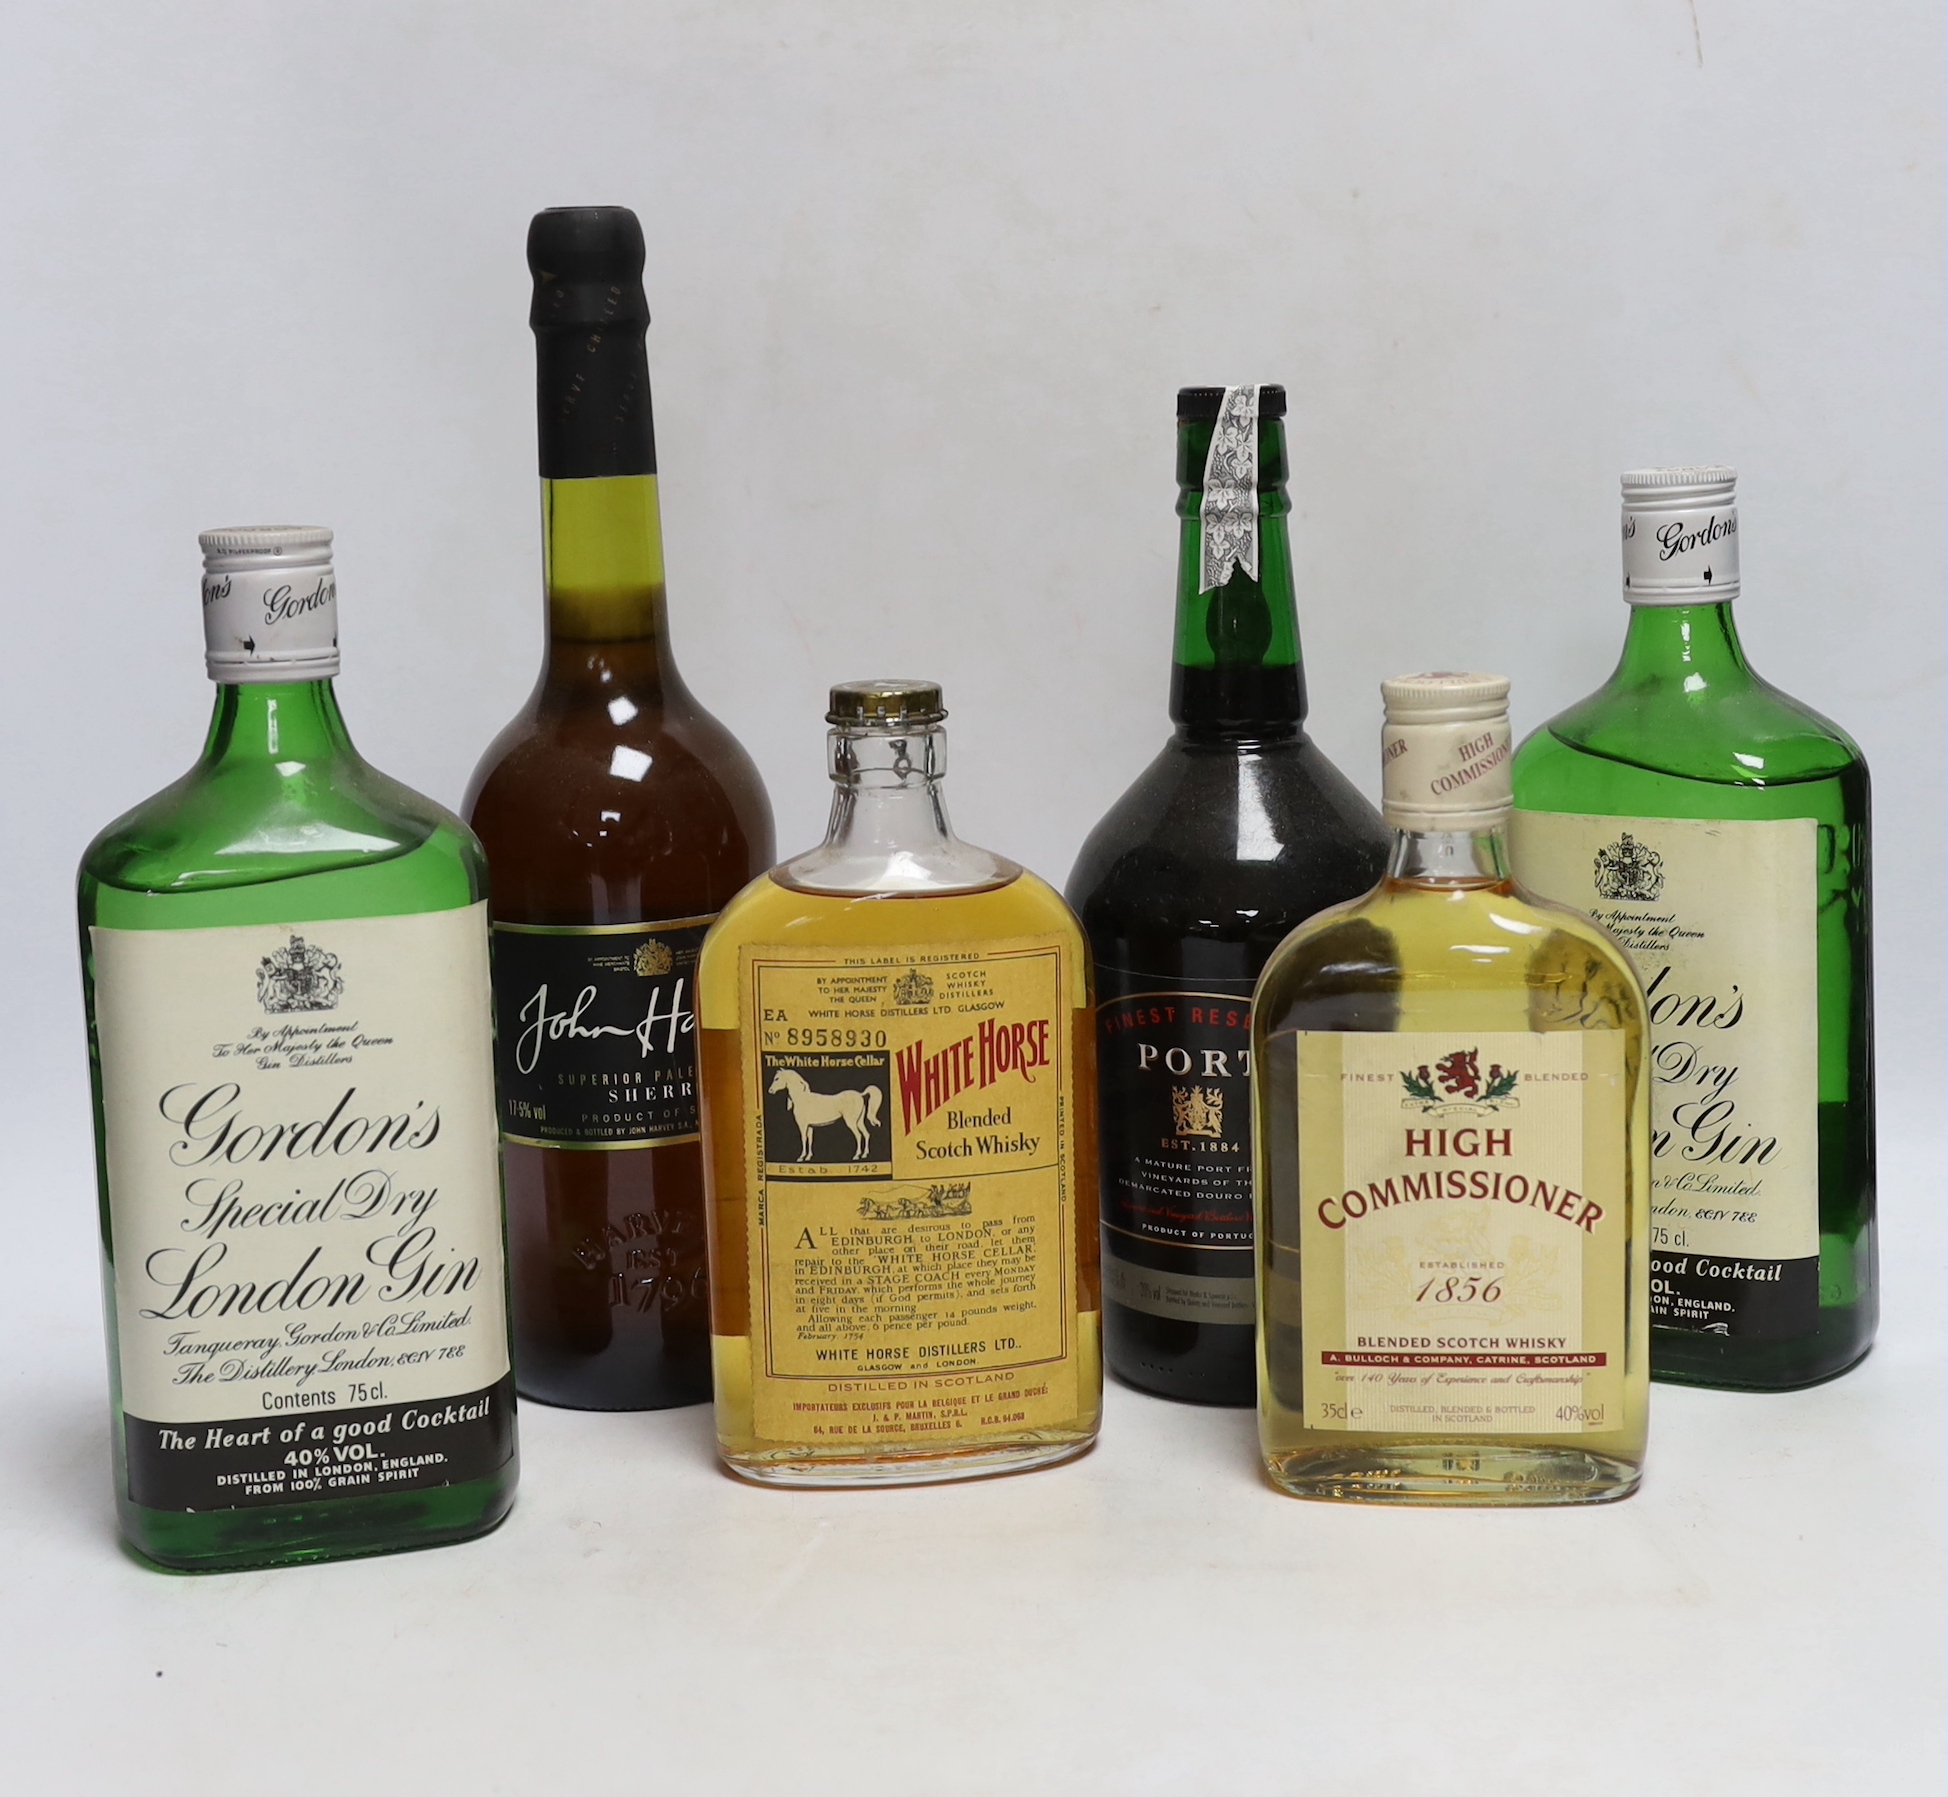 Two 75cl bottles of Gordons gin, two 35cl bottles of whisky, a bottle of sherry and a bottle of port